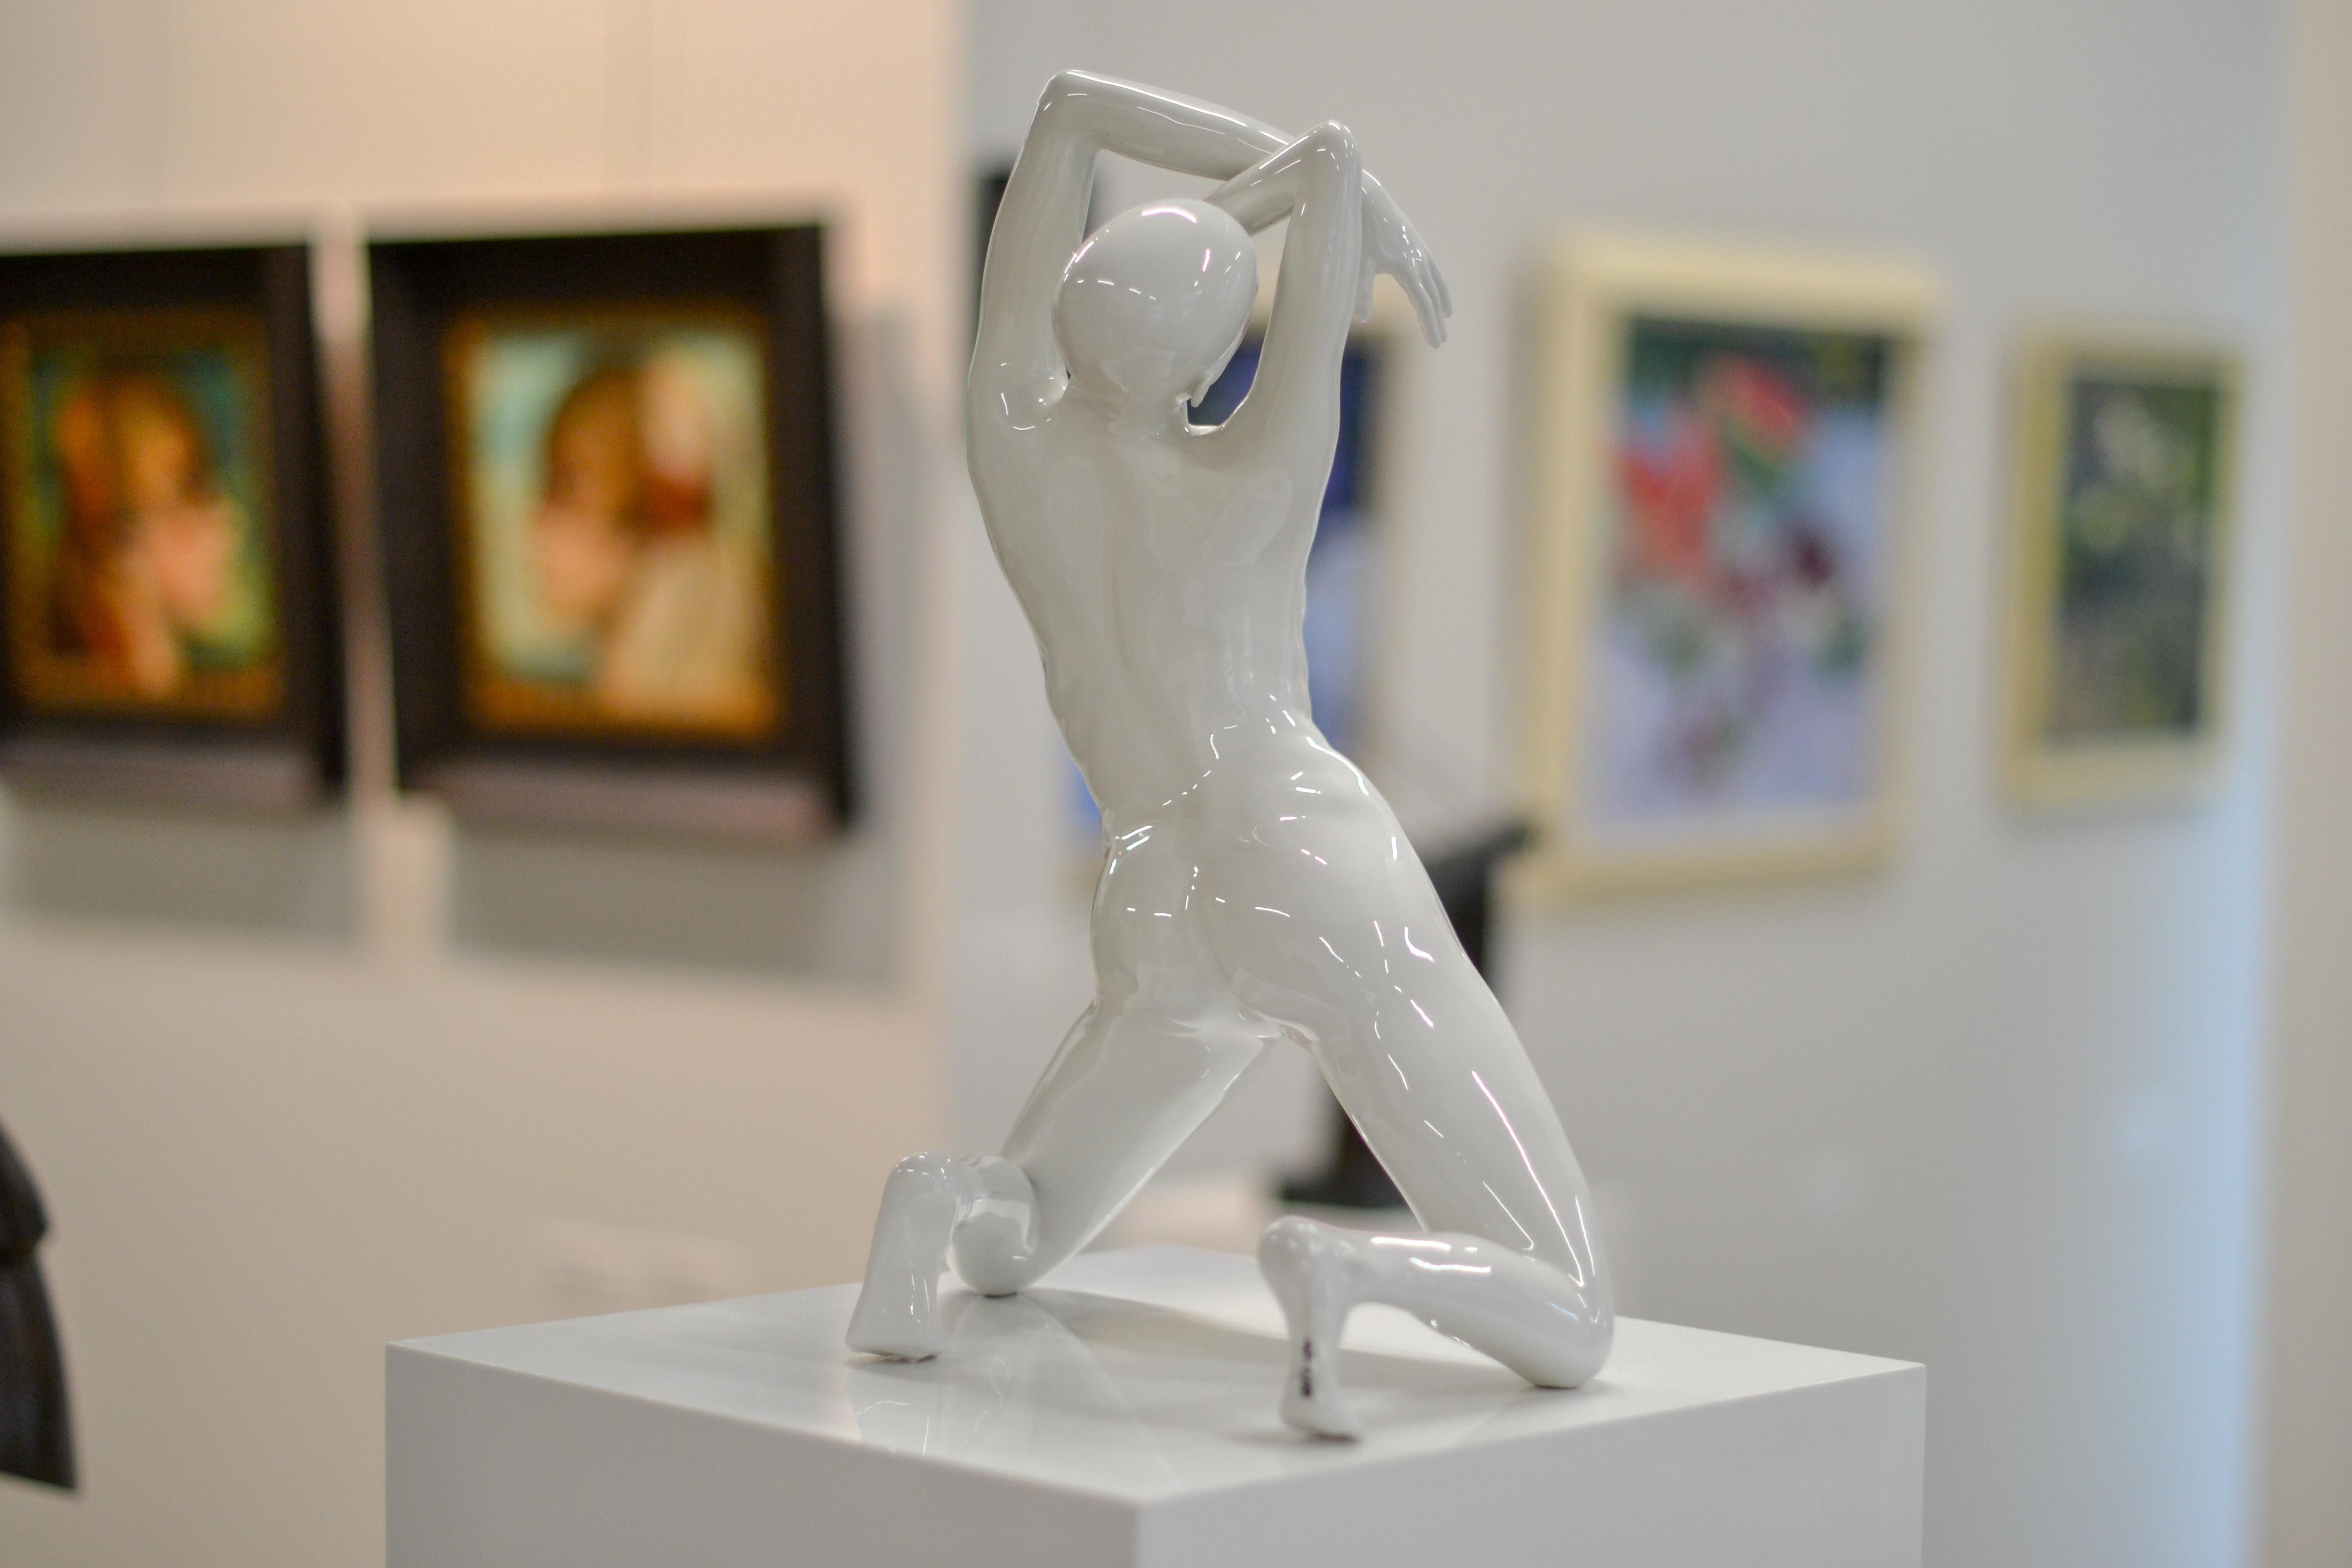 Andries Velting is a new artist at Gallerie Bonnard. His moving sculptures of dancers are a special addition tot our existing collection.

Velting says:
